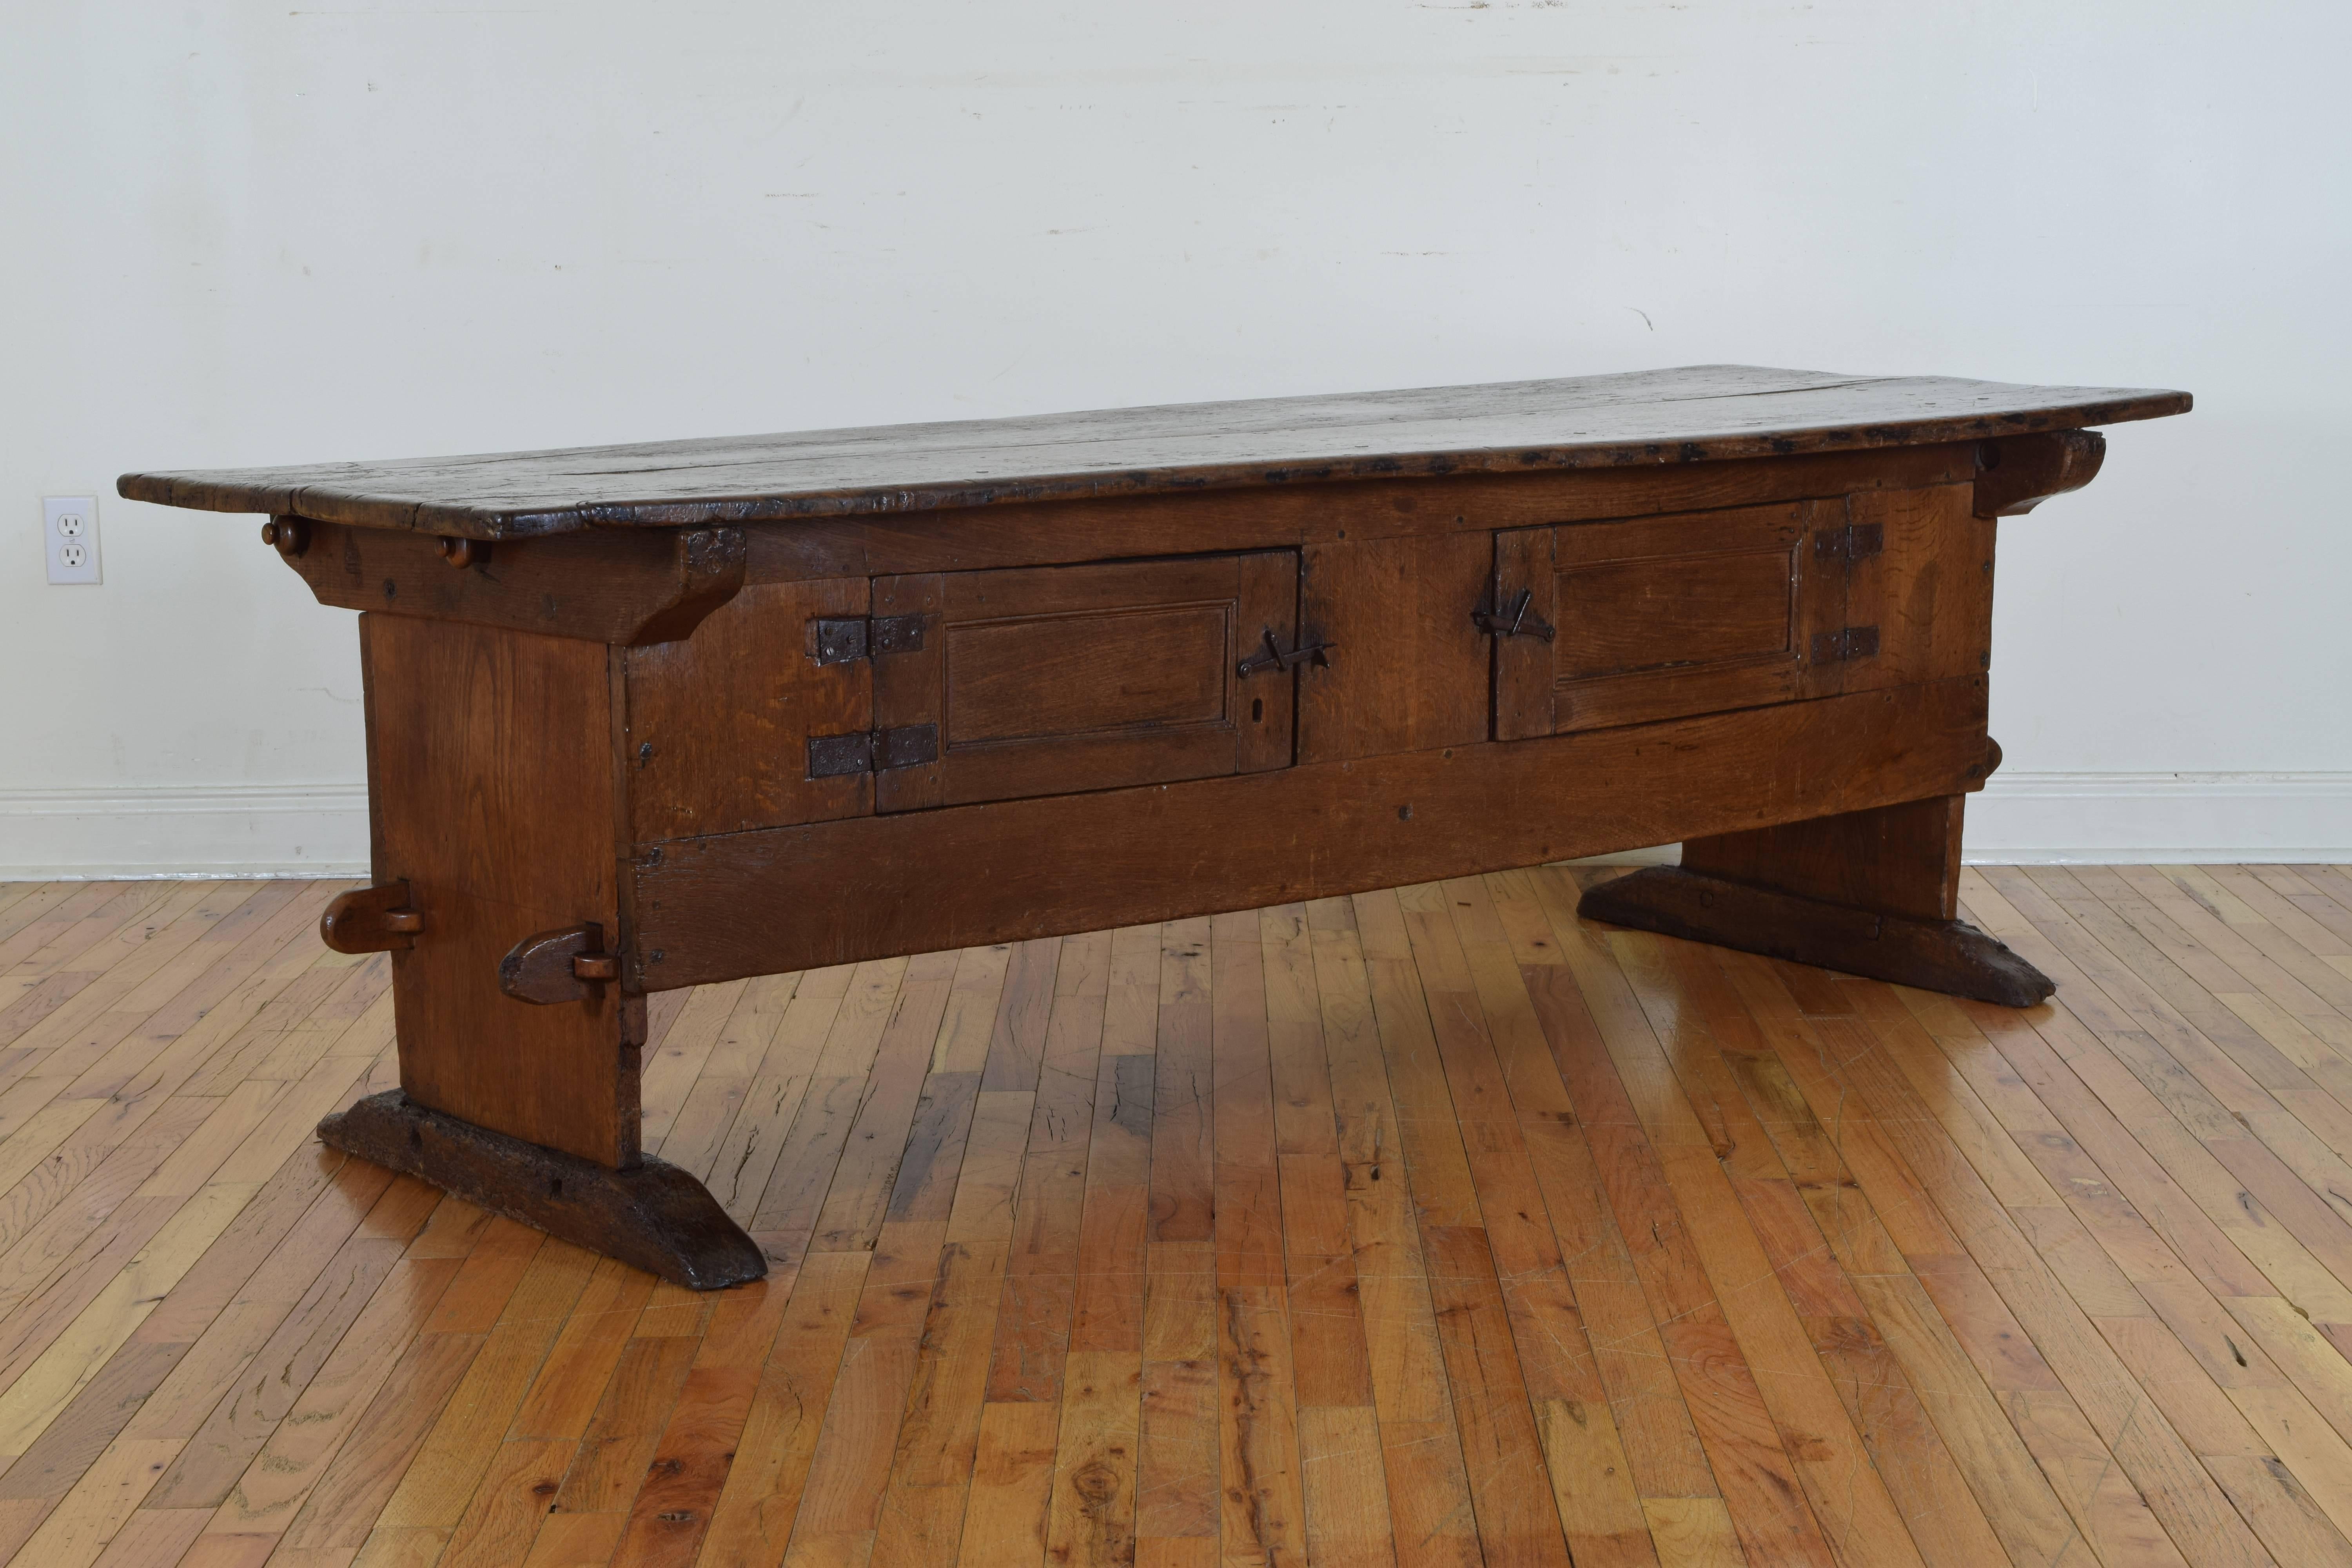 Constructed entirely of a light oak, the table has a two board rectangular top above a conforming cabinet housing two hinged doors, the cabinet supported by trestle legs on elongated bracket feet, probably originally used in a kitchen for an all